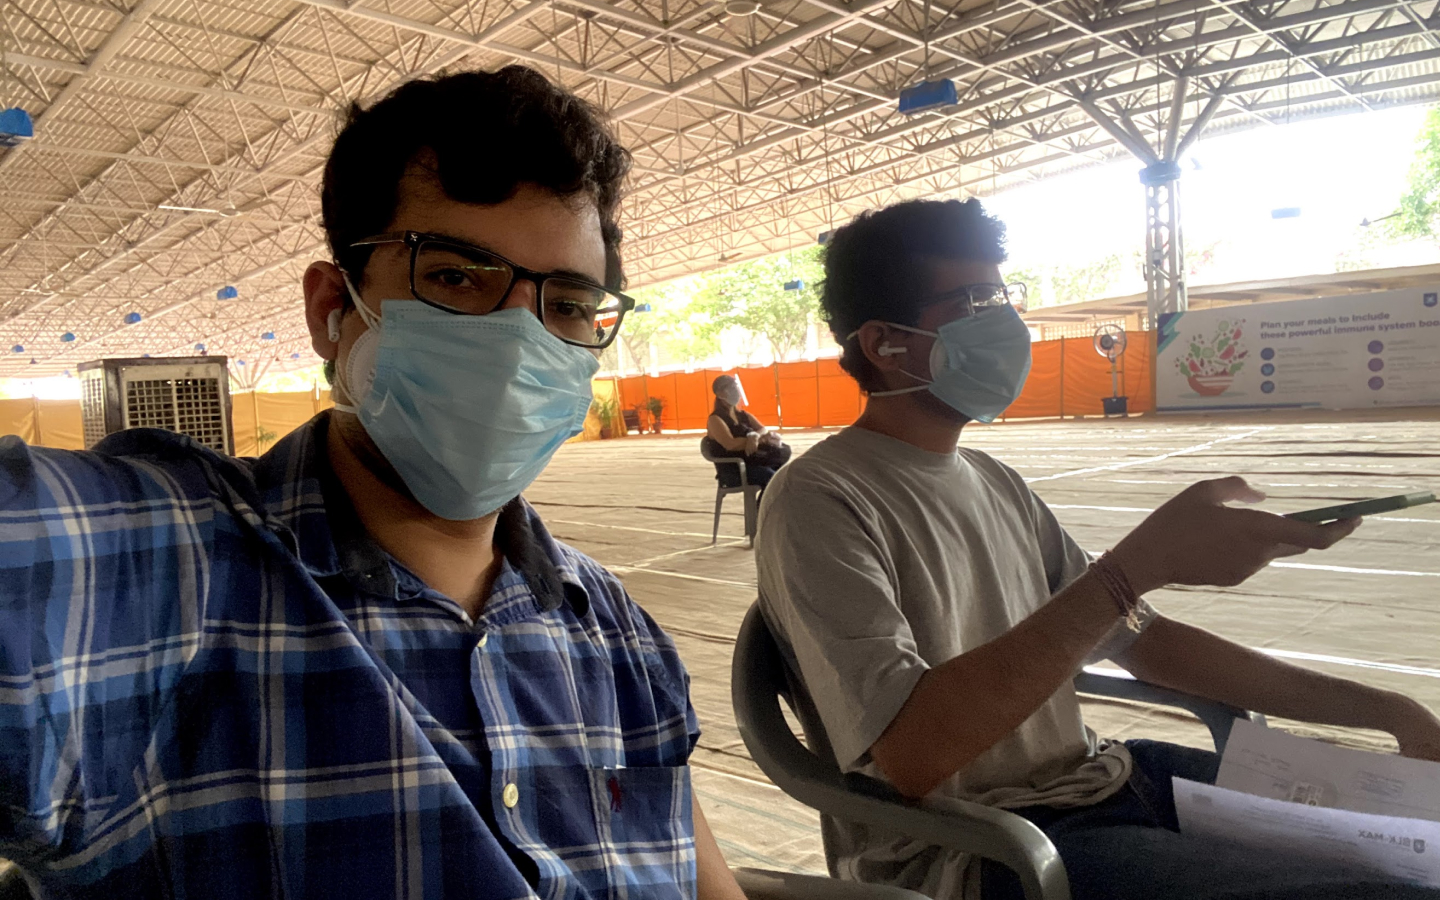 Two people sitting with masks on